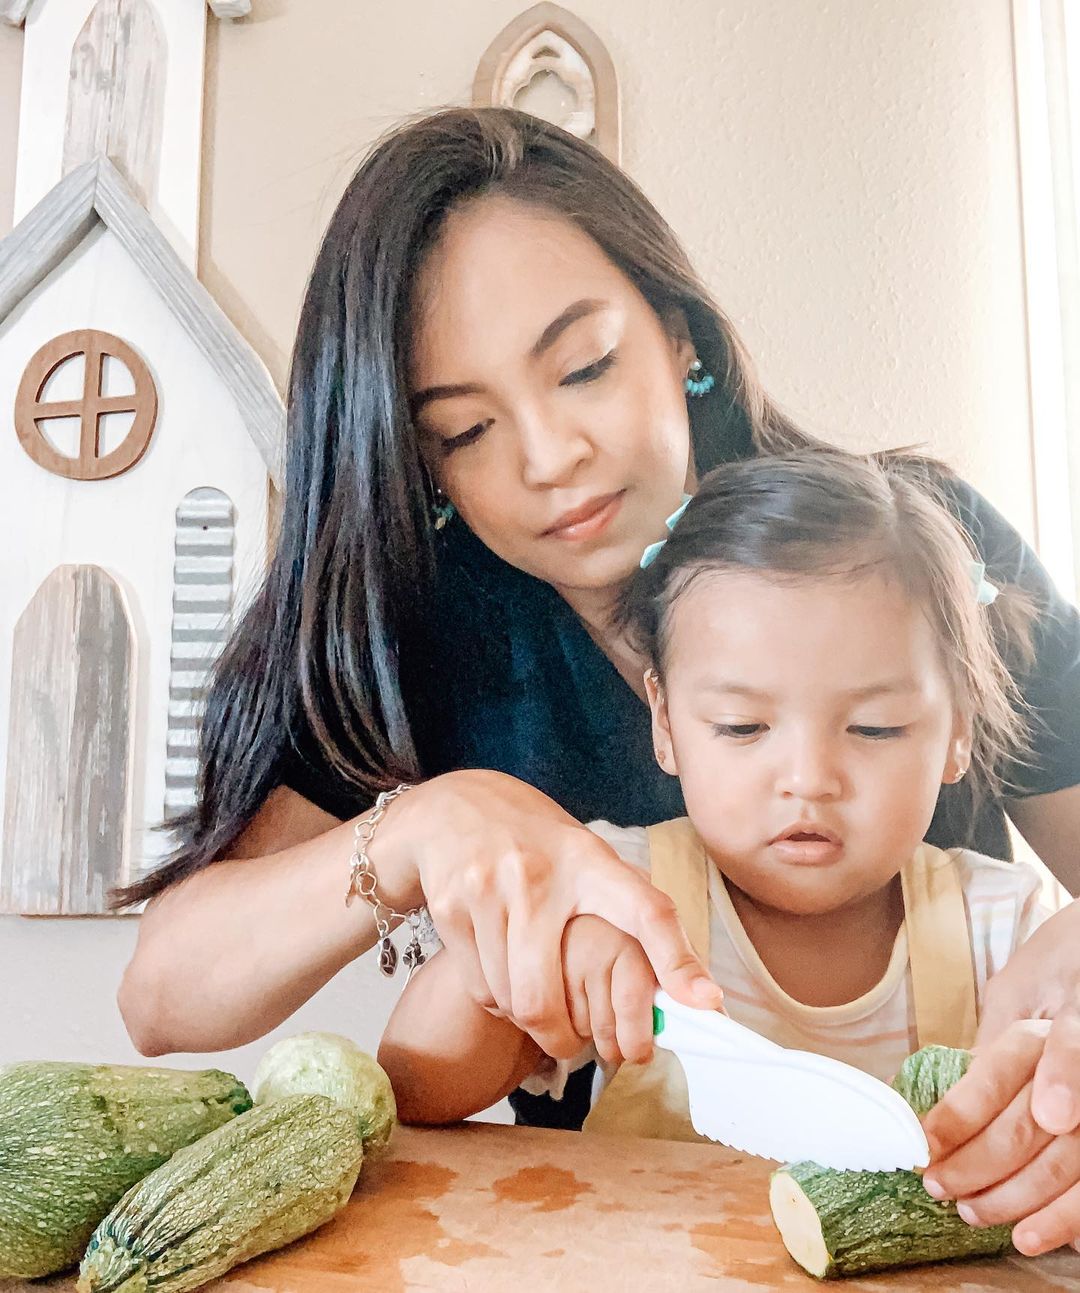 Nitzya Discovered Zulay Kitchen's kids Knives and Couldn't Be Happier! - Zulay Kitchen